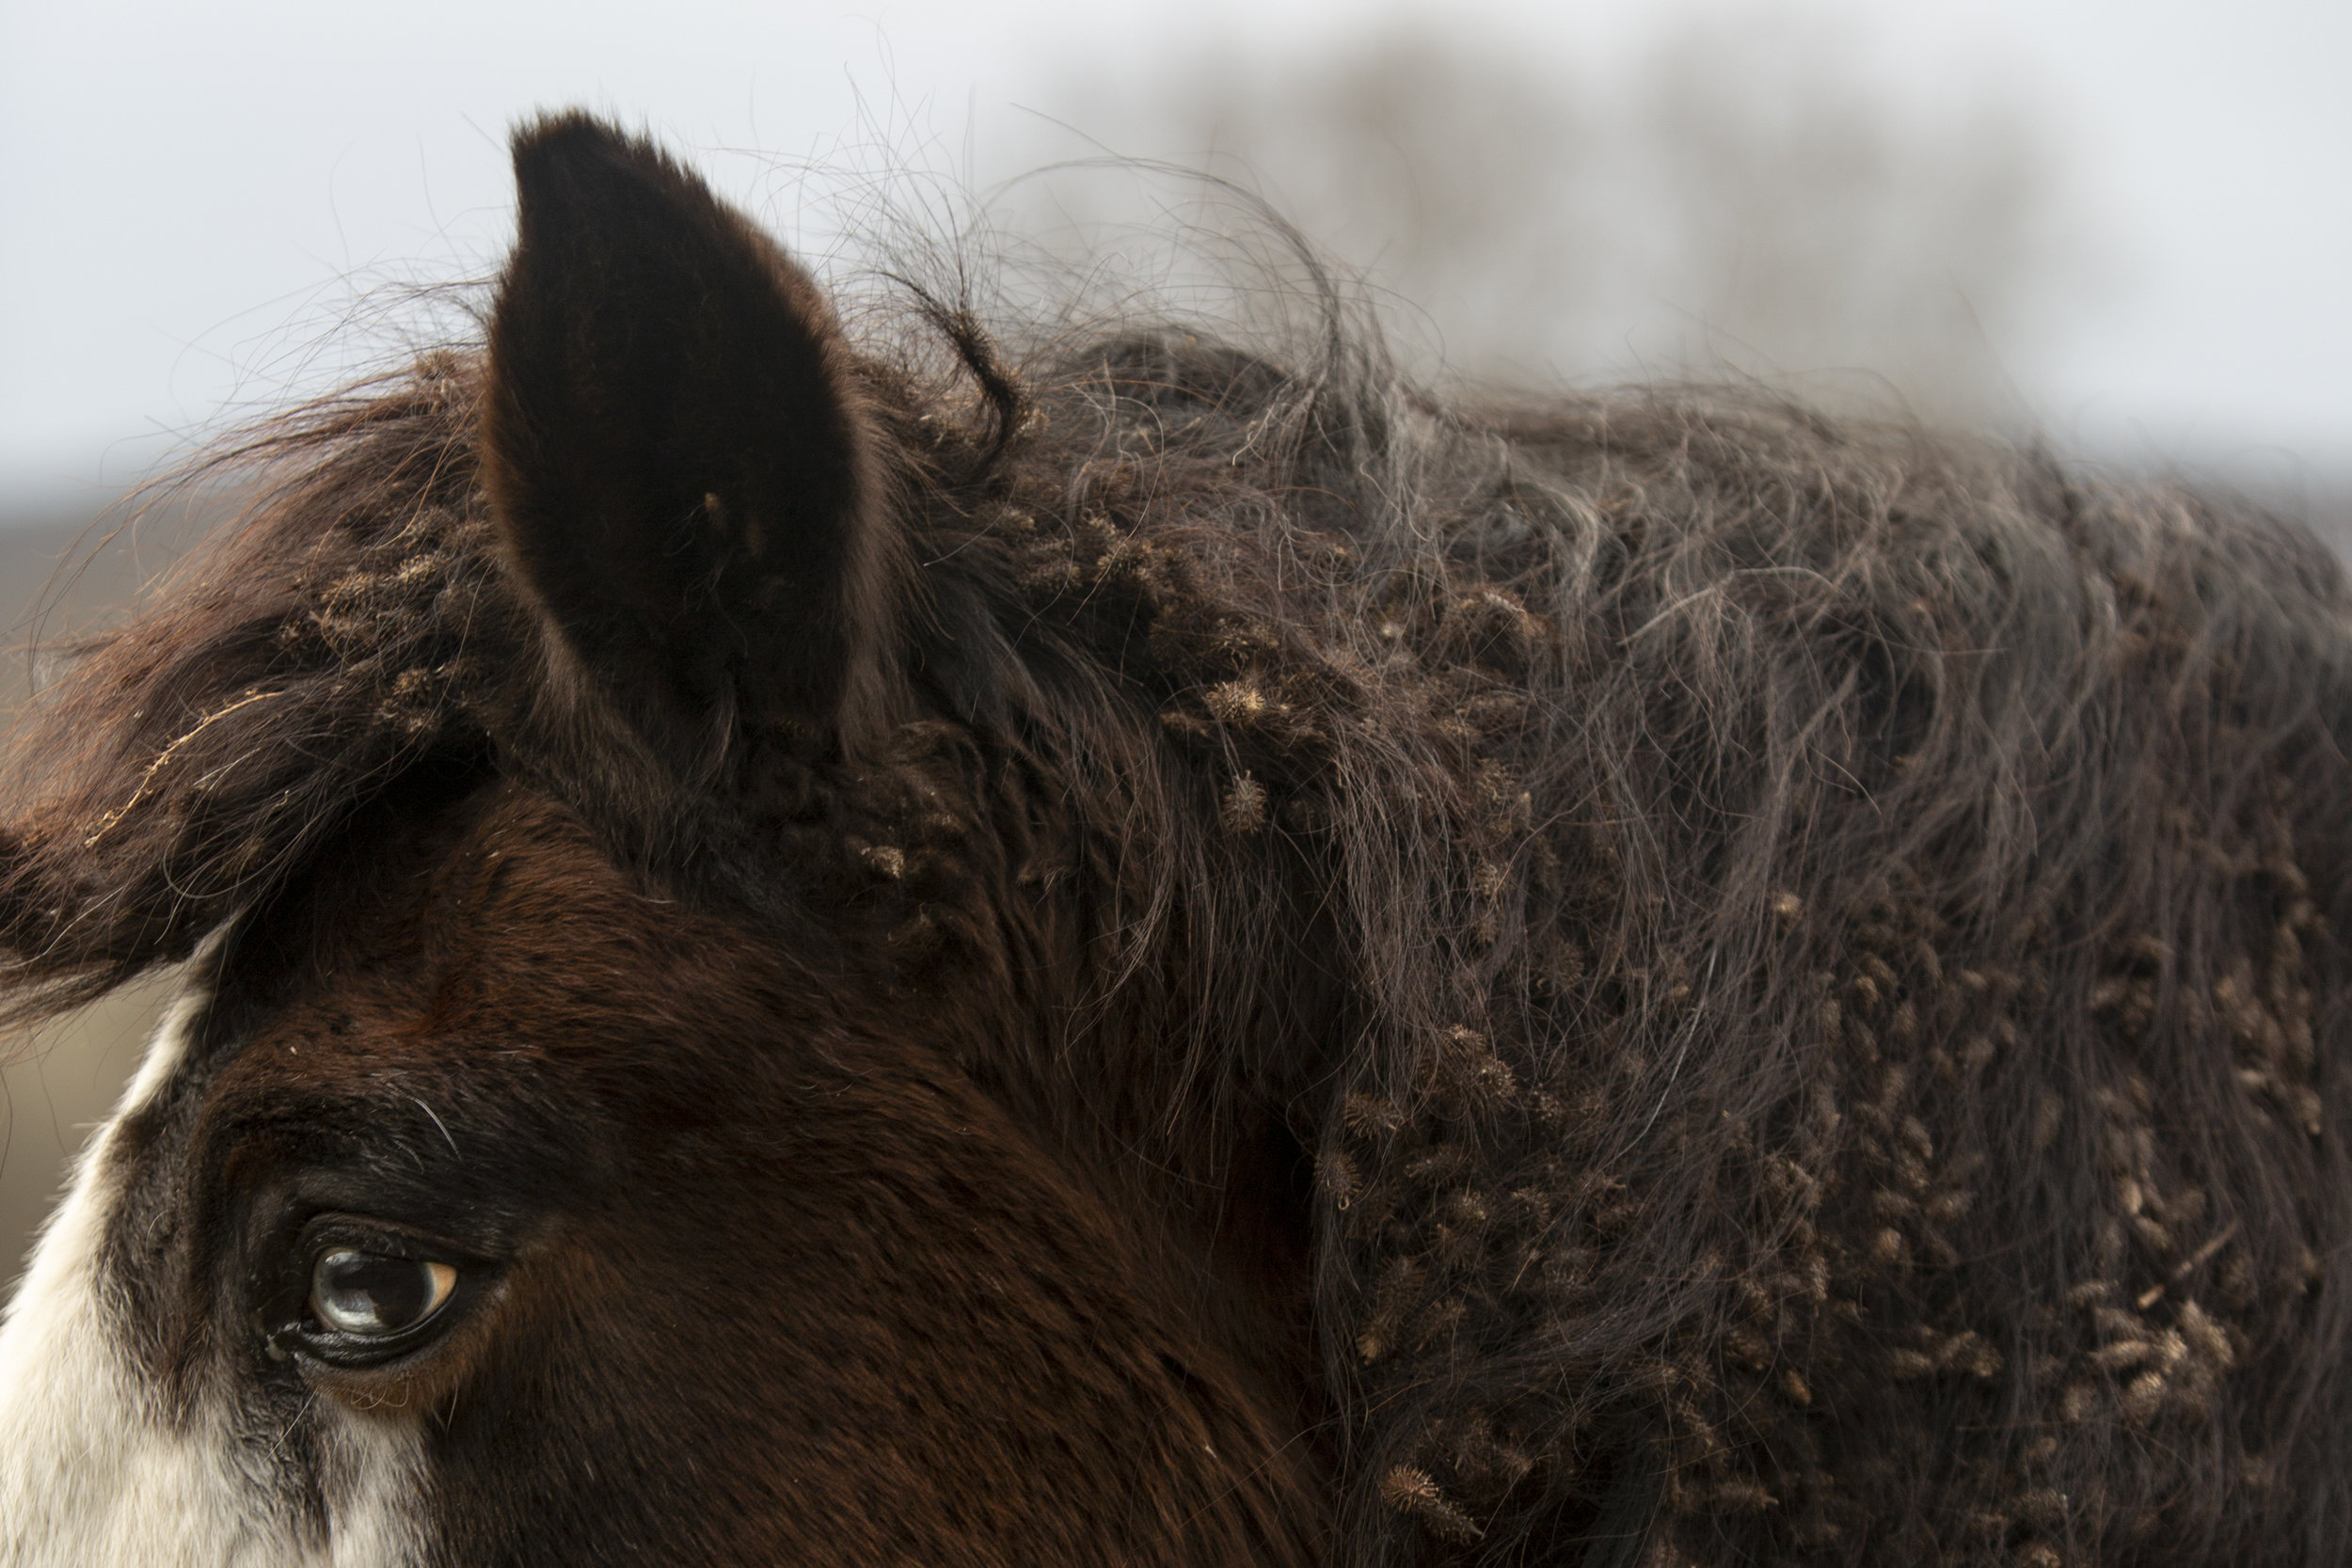  Though he is looked after by family and friends, the burs knotted in Chief’s mane signify a decline in attention since his owner moved away over ten years ago. Many residents of Sharpsburg leave the community in search of better work prospects. 